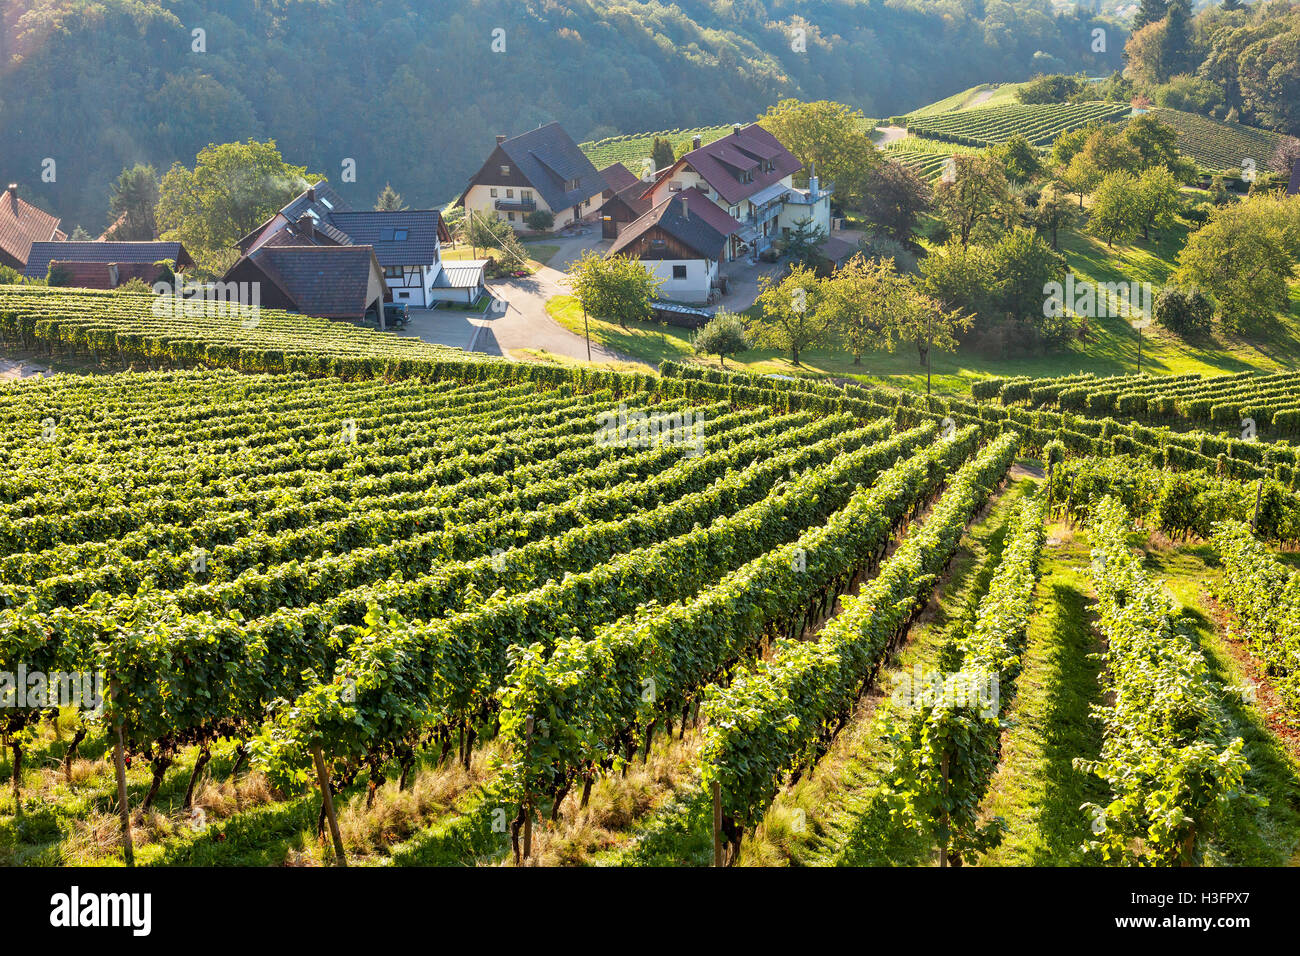 Vineyards at harvest time in Southern Germany Black Forest Region Ortenau Stock Photo